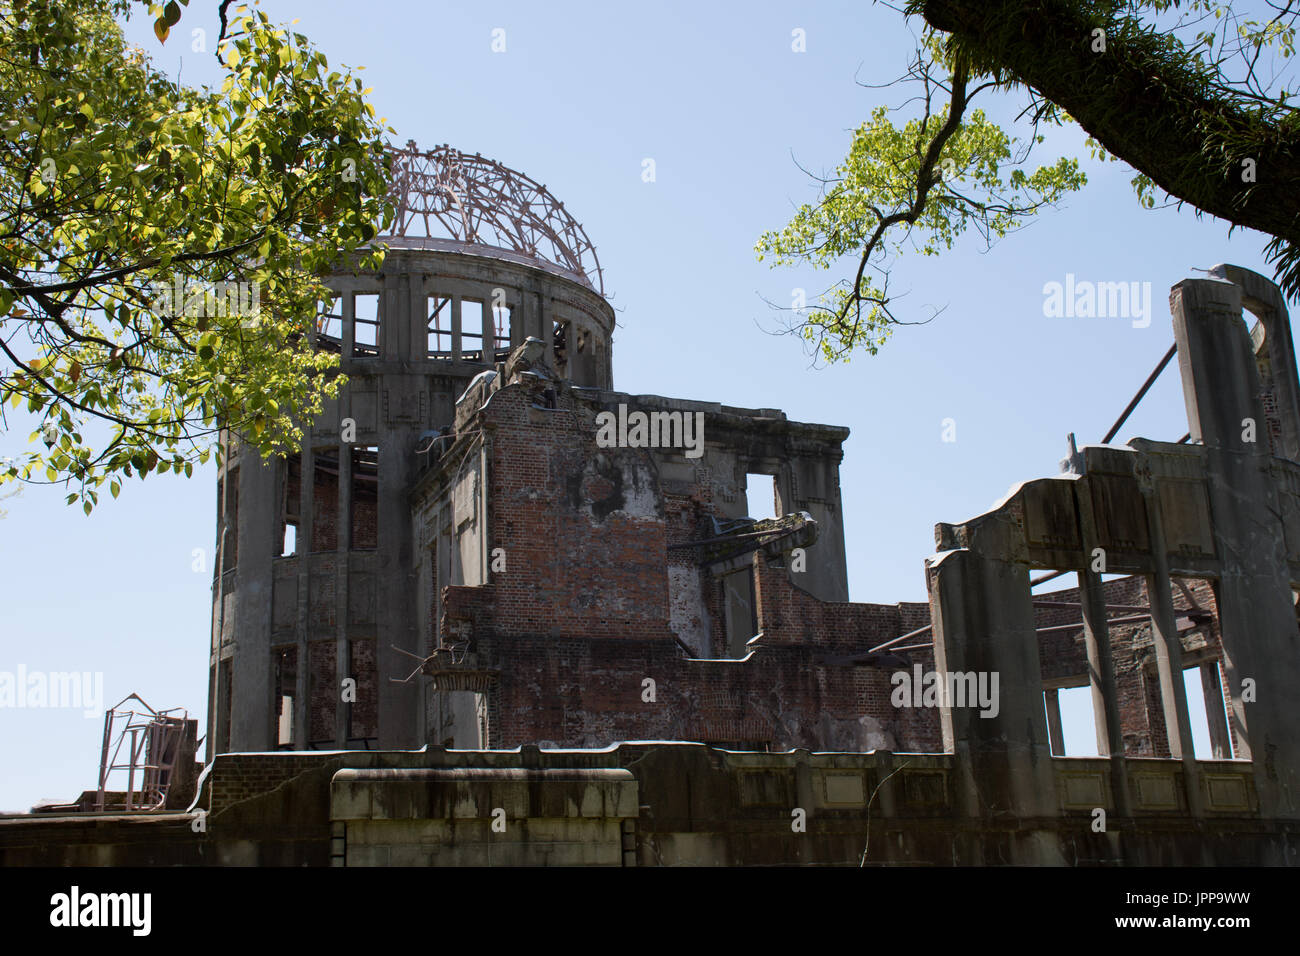 A Bomb or Atomic Bomb Memorial building in Hiroshima Peace Memorial with tree branches in the foreground. Stock Photo